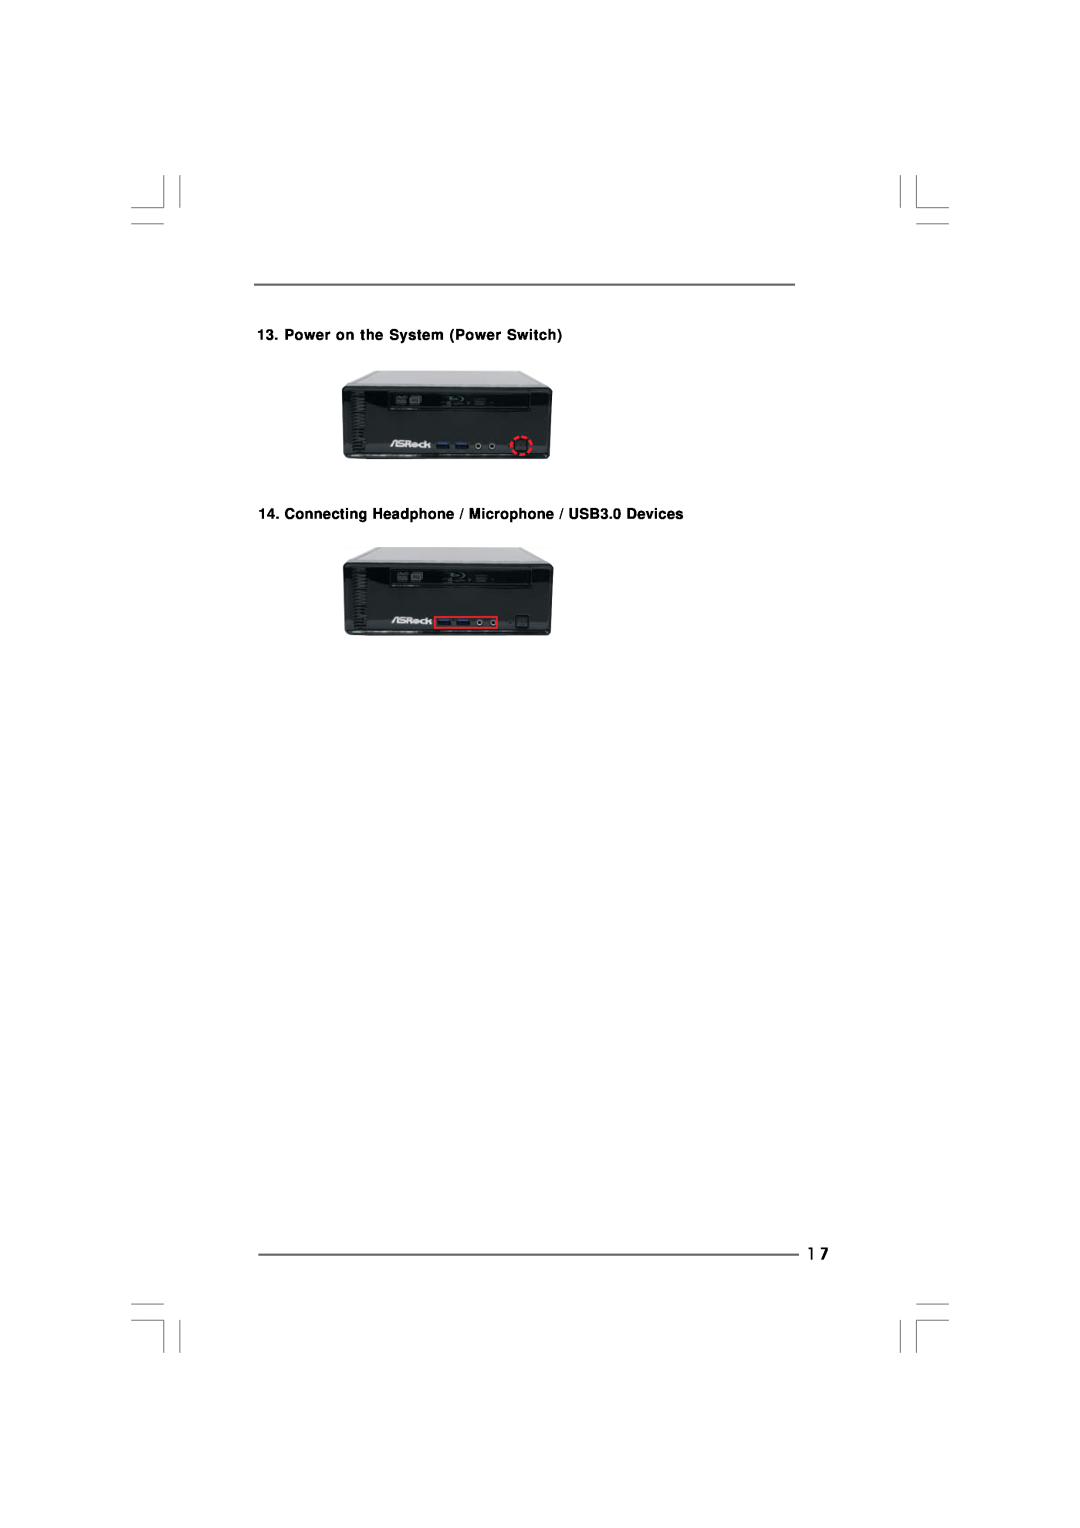 ASRock ION 3D Series manual Power on the System Power Switch, Connecting Headphone / Microphone / USB3.0 Devices 